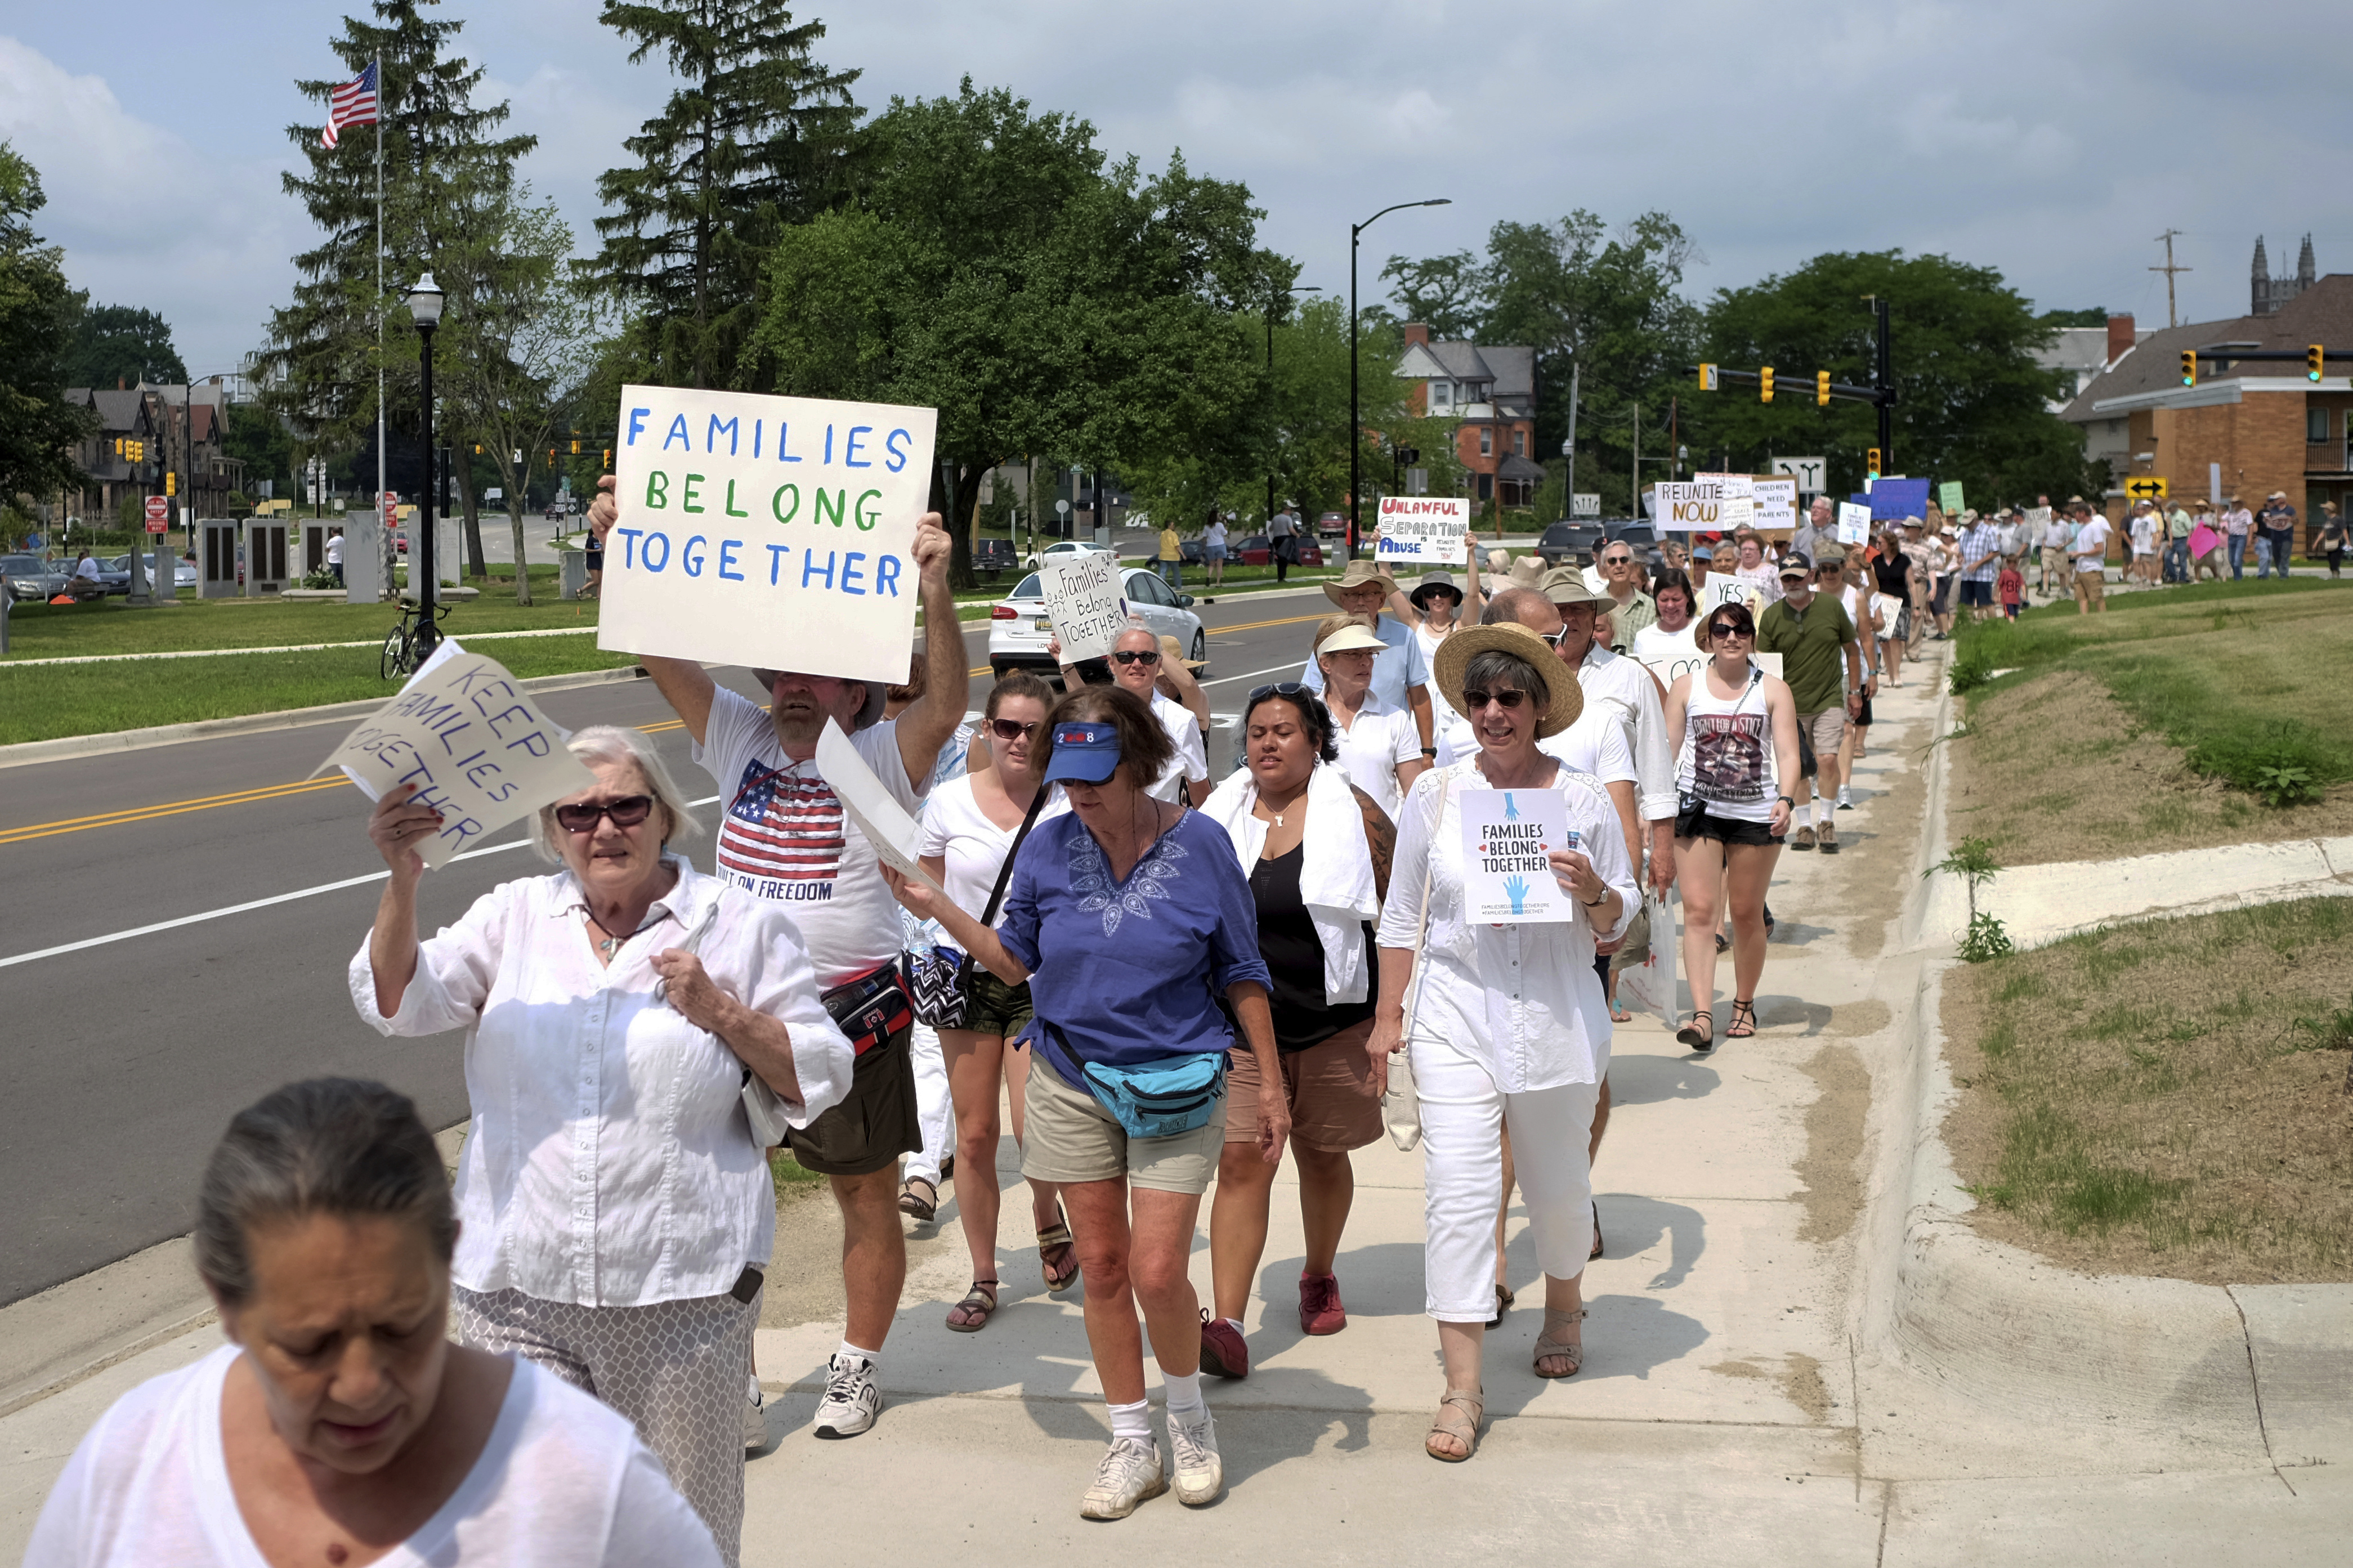 Protesters march down W. Michigan Ave. towards the Carnegie Library during a protest against separating immigrant families, Saturday, June 30, 2018, in Jackson, Mich. (Nikos Frazier/Jackson Citizen Patriot via AP)